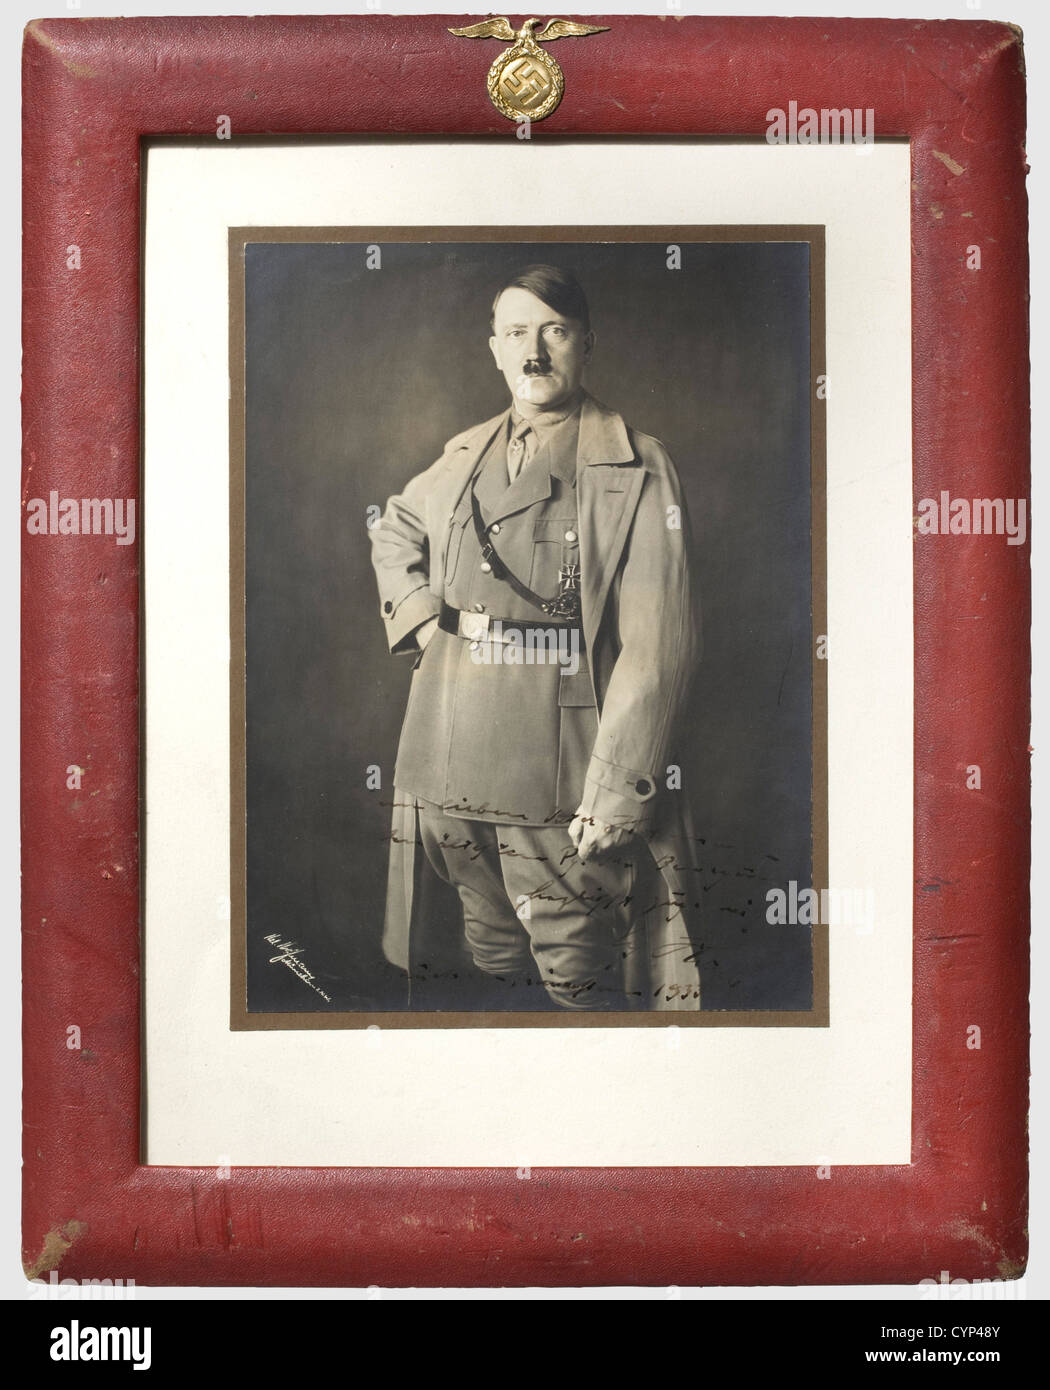 Adolf Hitler - Andreas Hofmann, A framed dedication photograph 'Dem lieben Vater Hofmann - dem Ältesten PG. der Bewegung herzlichst zugeeignet - Adolf Hitler - München, Weihnachten 1933' (For the dear Father Hofmann - the oldest party comrade of the movement kindest dedicated - Adolf Hitler - Munich, Christmas 1933). Photograph by H. Hoffmann, Hitler in his party uniform with coat. On passepartout, behind glass and in a ruby-coloured leather frame with a superimposed early-version national eagle made from brass on top. The reverse side also in ruby-coloured lea, Stock Photo